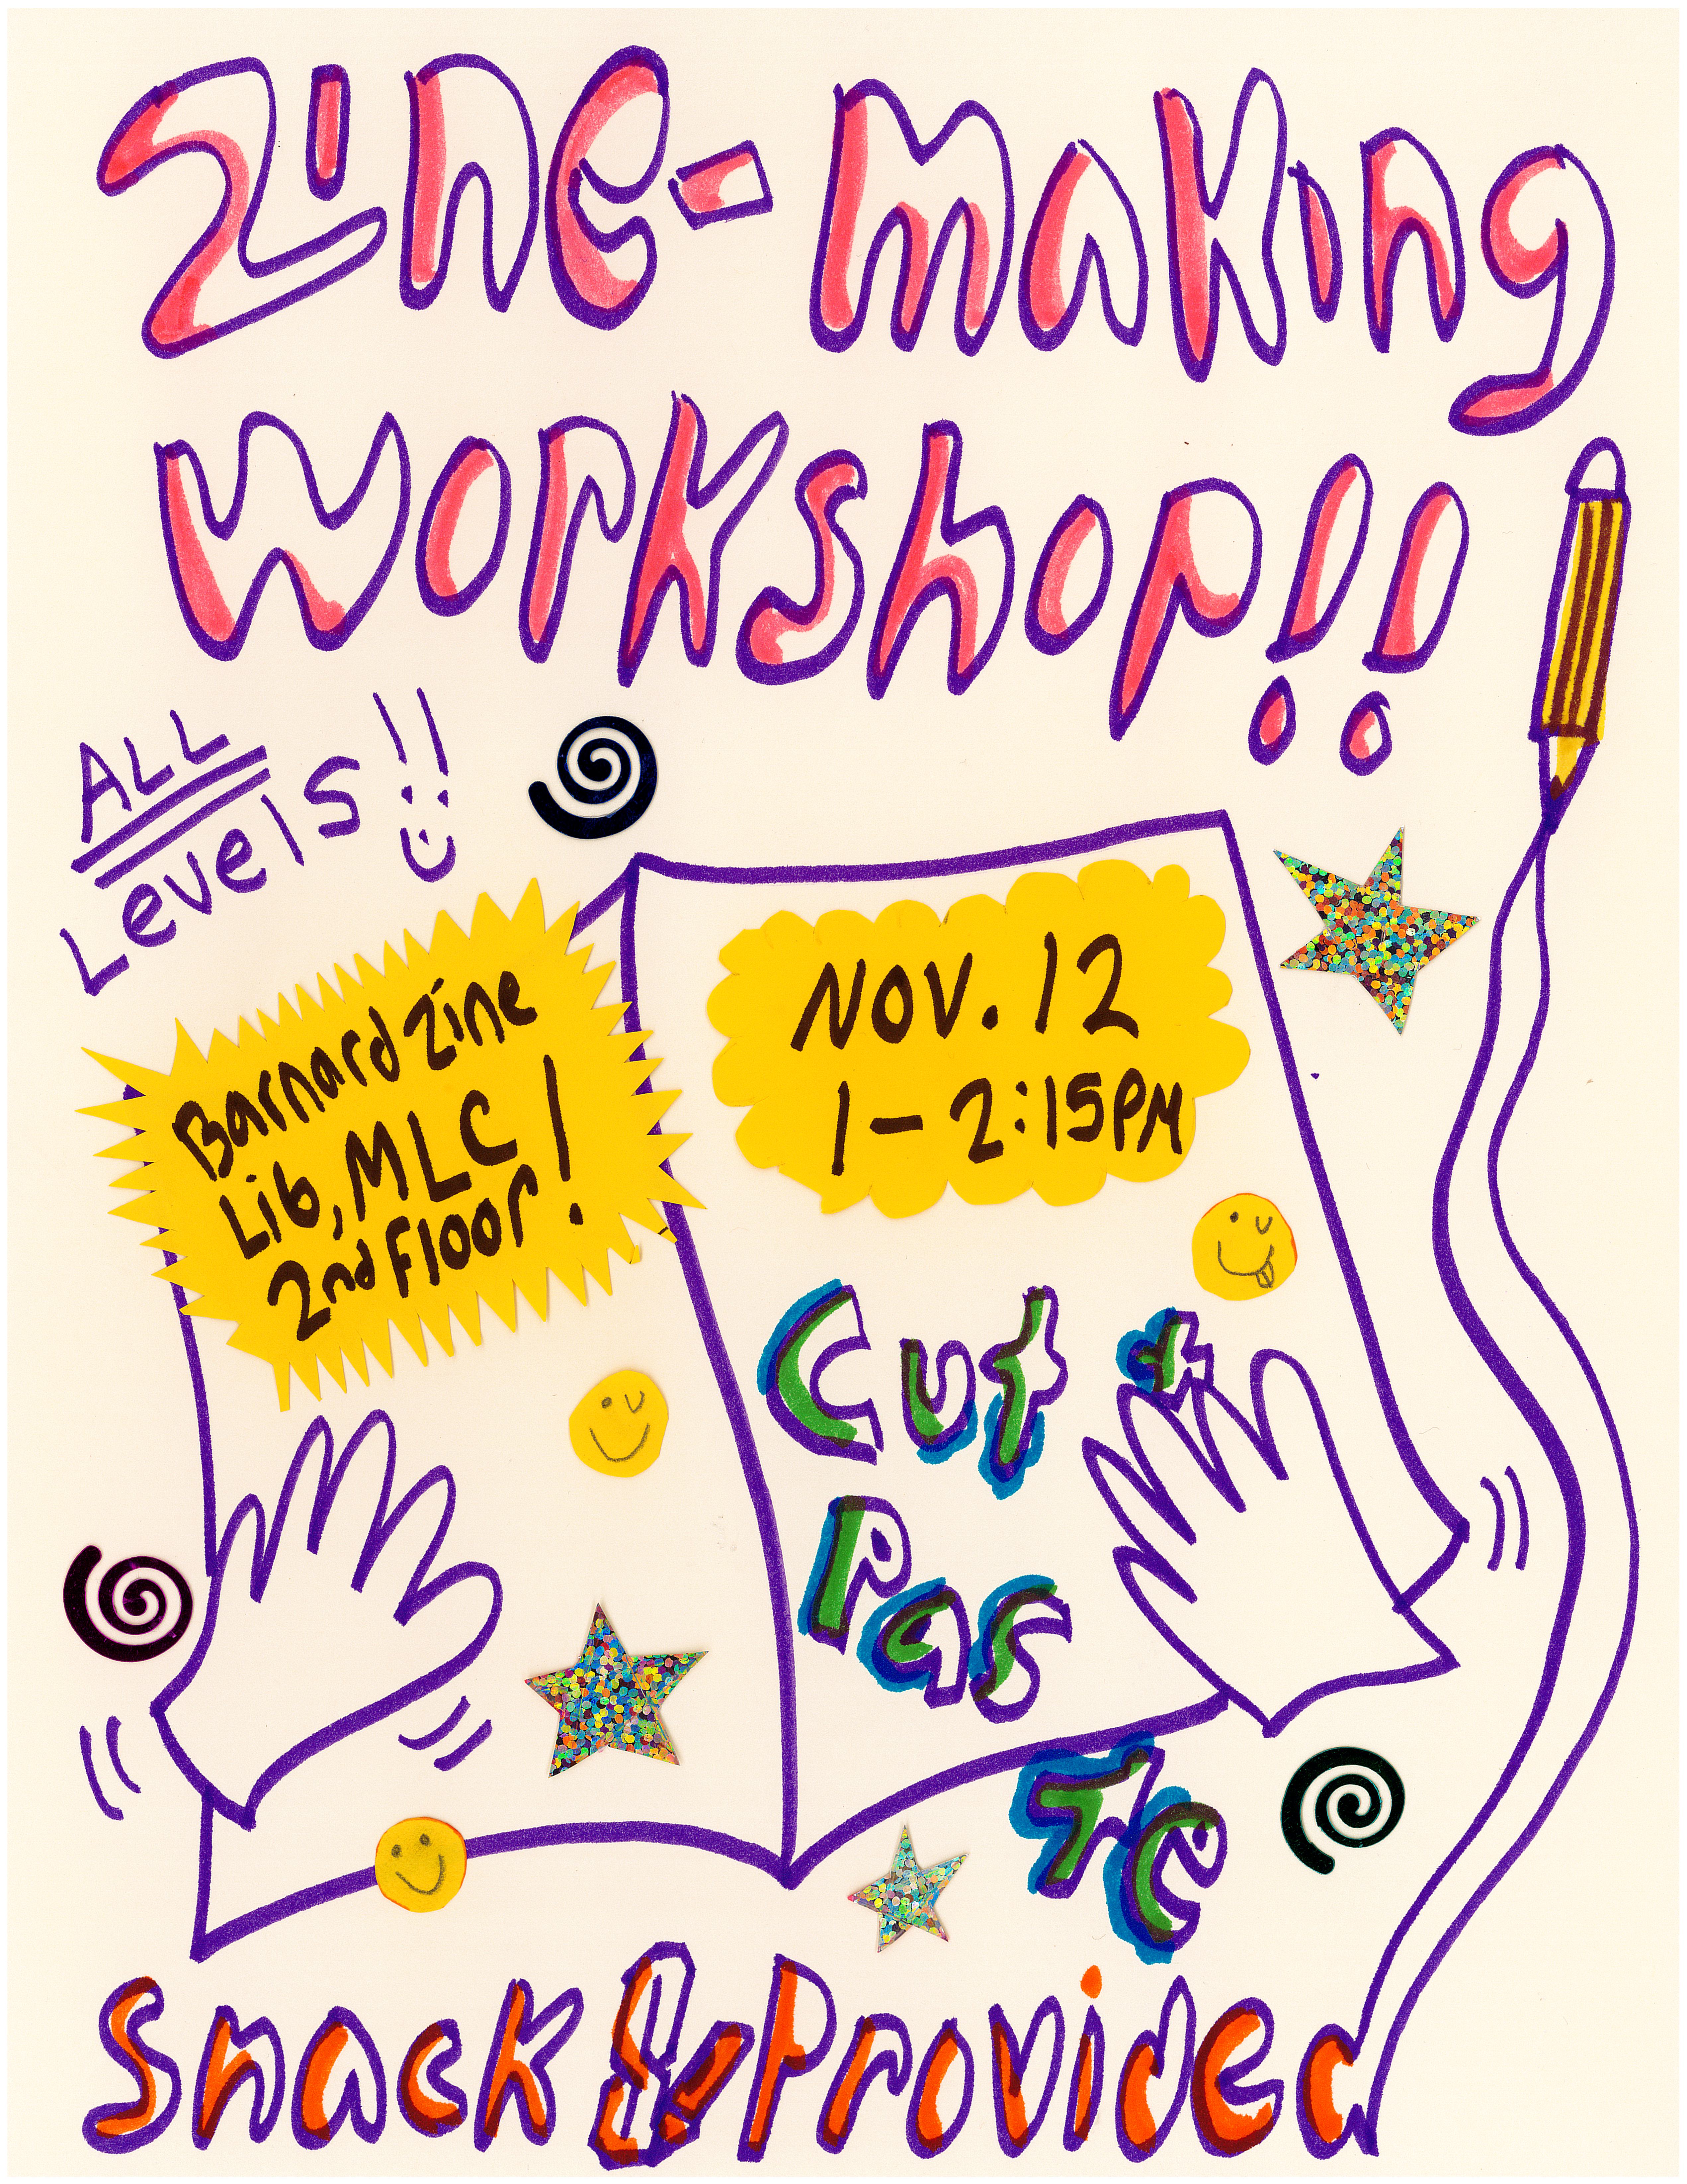 flyer drawn in purple marker ink, with glitter stars, happy faces and two hands holding a zine. The text reads "zine-making workshop, all levels, november 12 1 PM to 2:15 PM, barnard zine libary milstein center second floor, cut and paste"